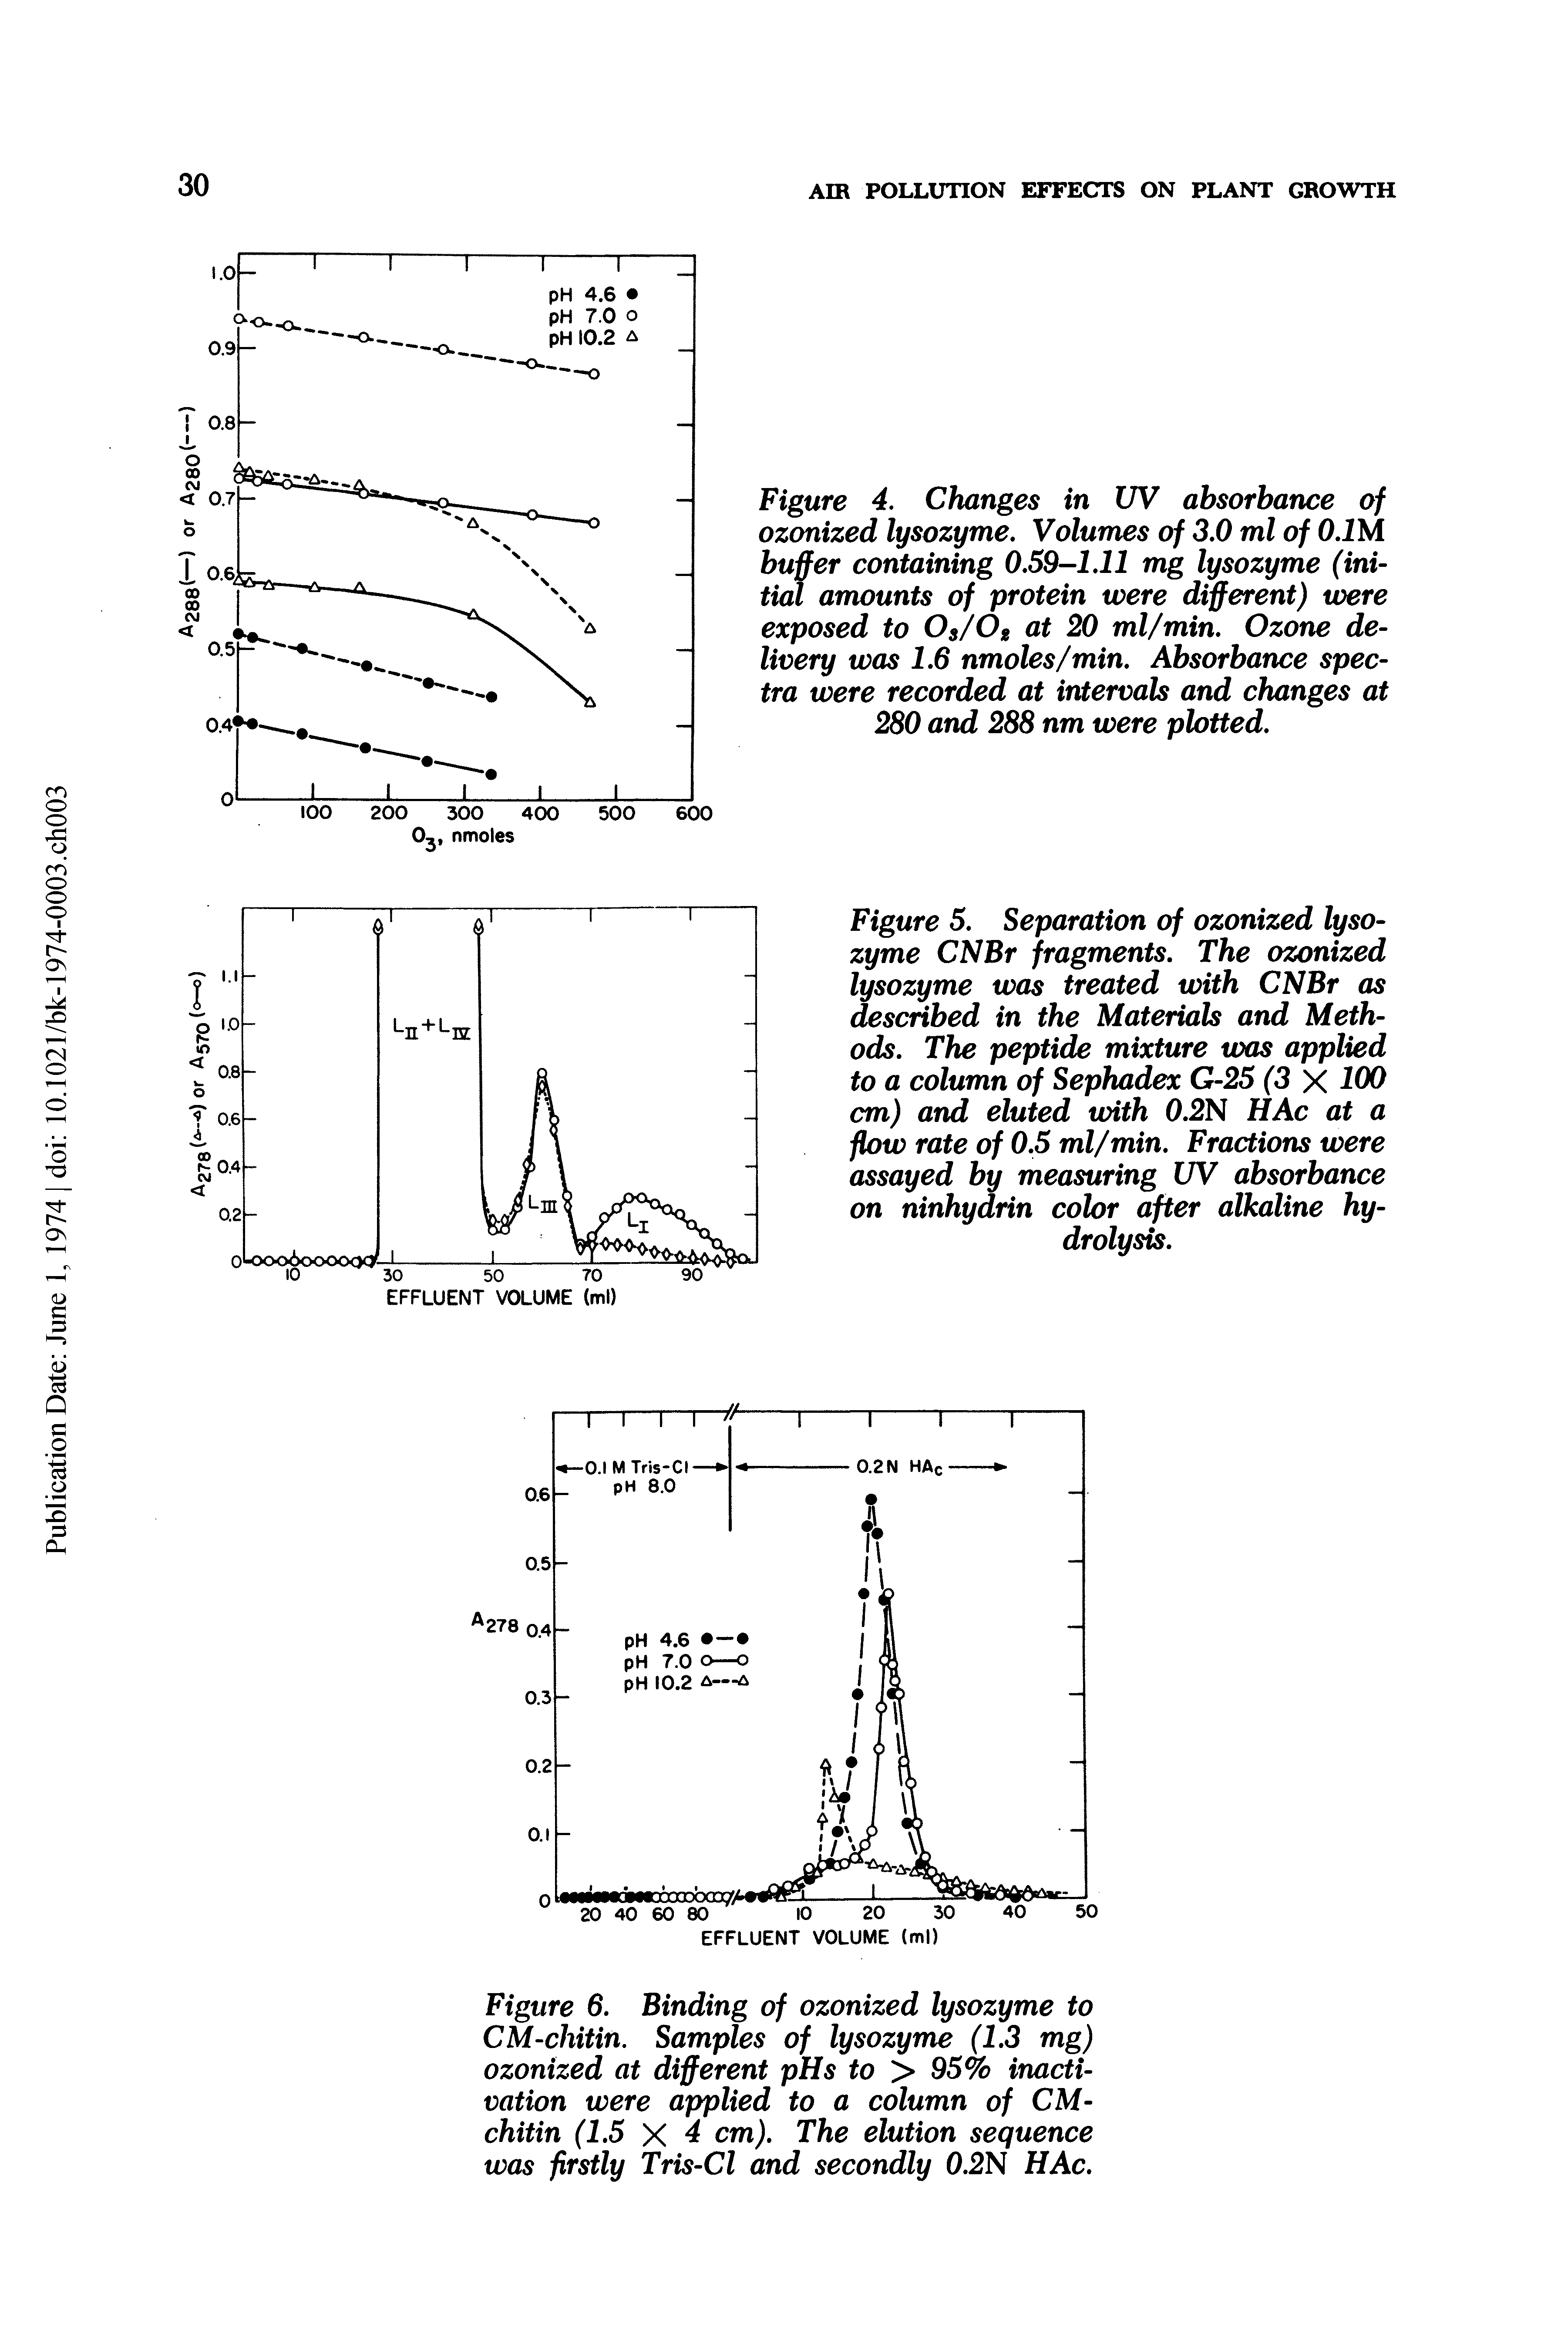 Figure 4. Changes in UV absorbance of ozonized lysozyme. Volumes of 3.0 ml of O.IM buffer containing 0.59-1.11 mg lysozyme (initial amounts of protein were different) were exposed to Os/Og at 20 ml/min. Ozone delivery was 1.6 nmoles/min. Absorbance spectra were recorded at intervals and changes at 280 and 288 nm were plotted.